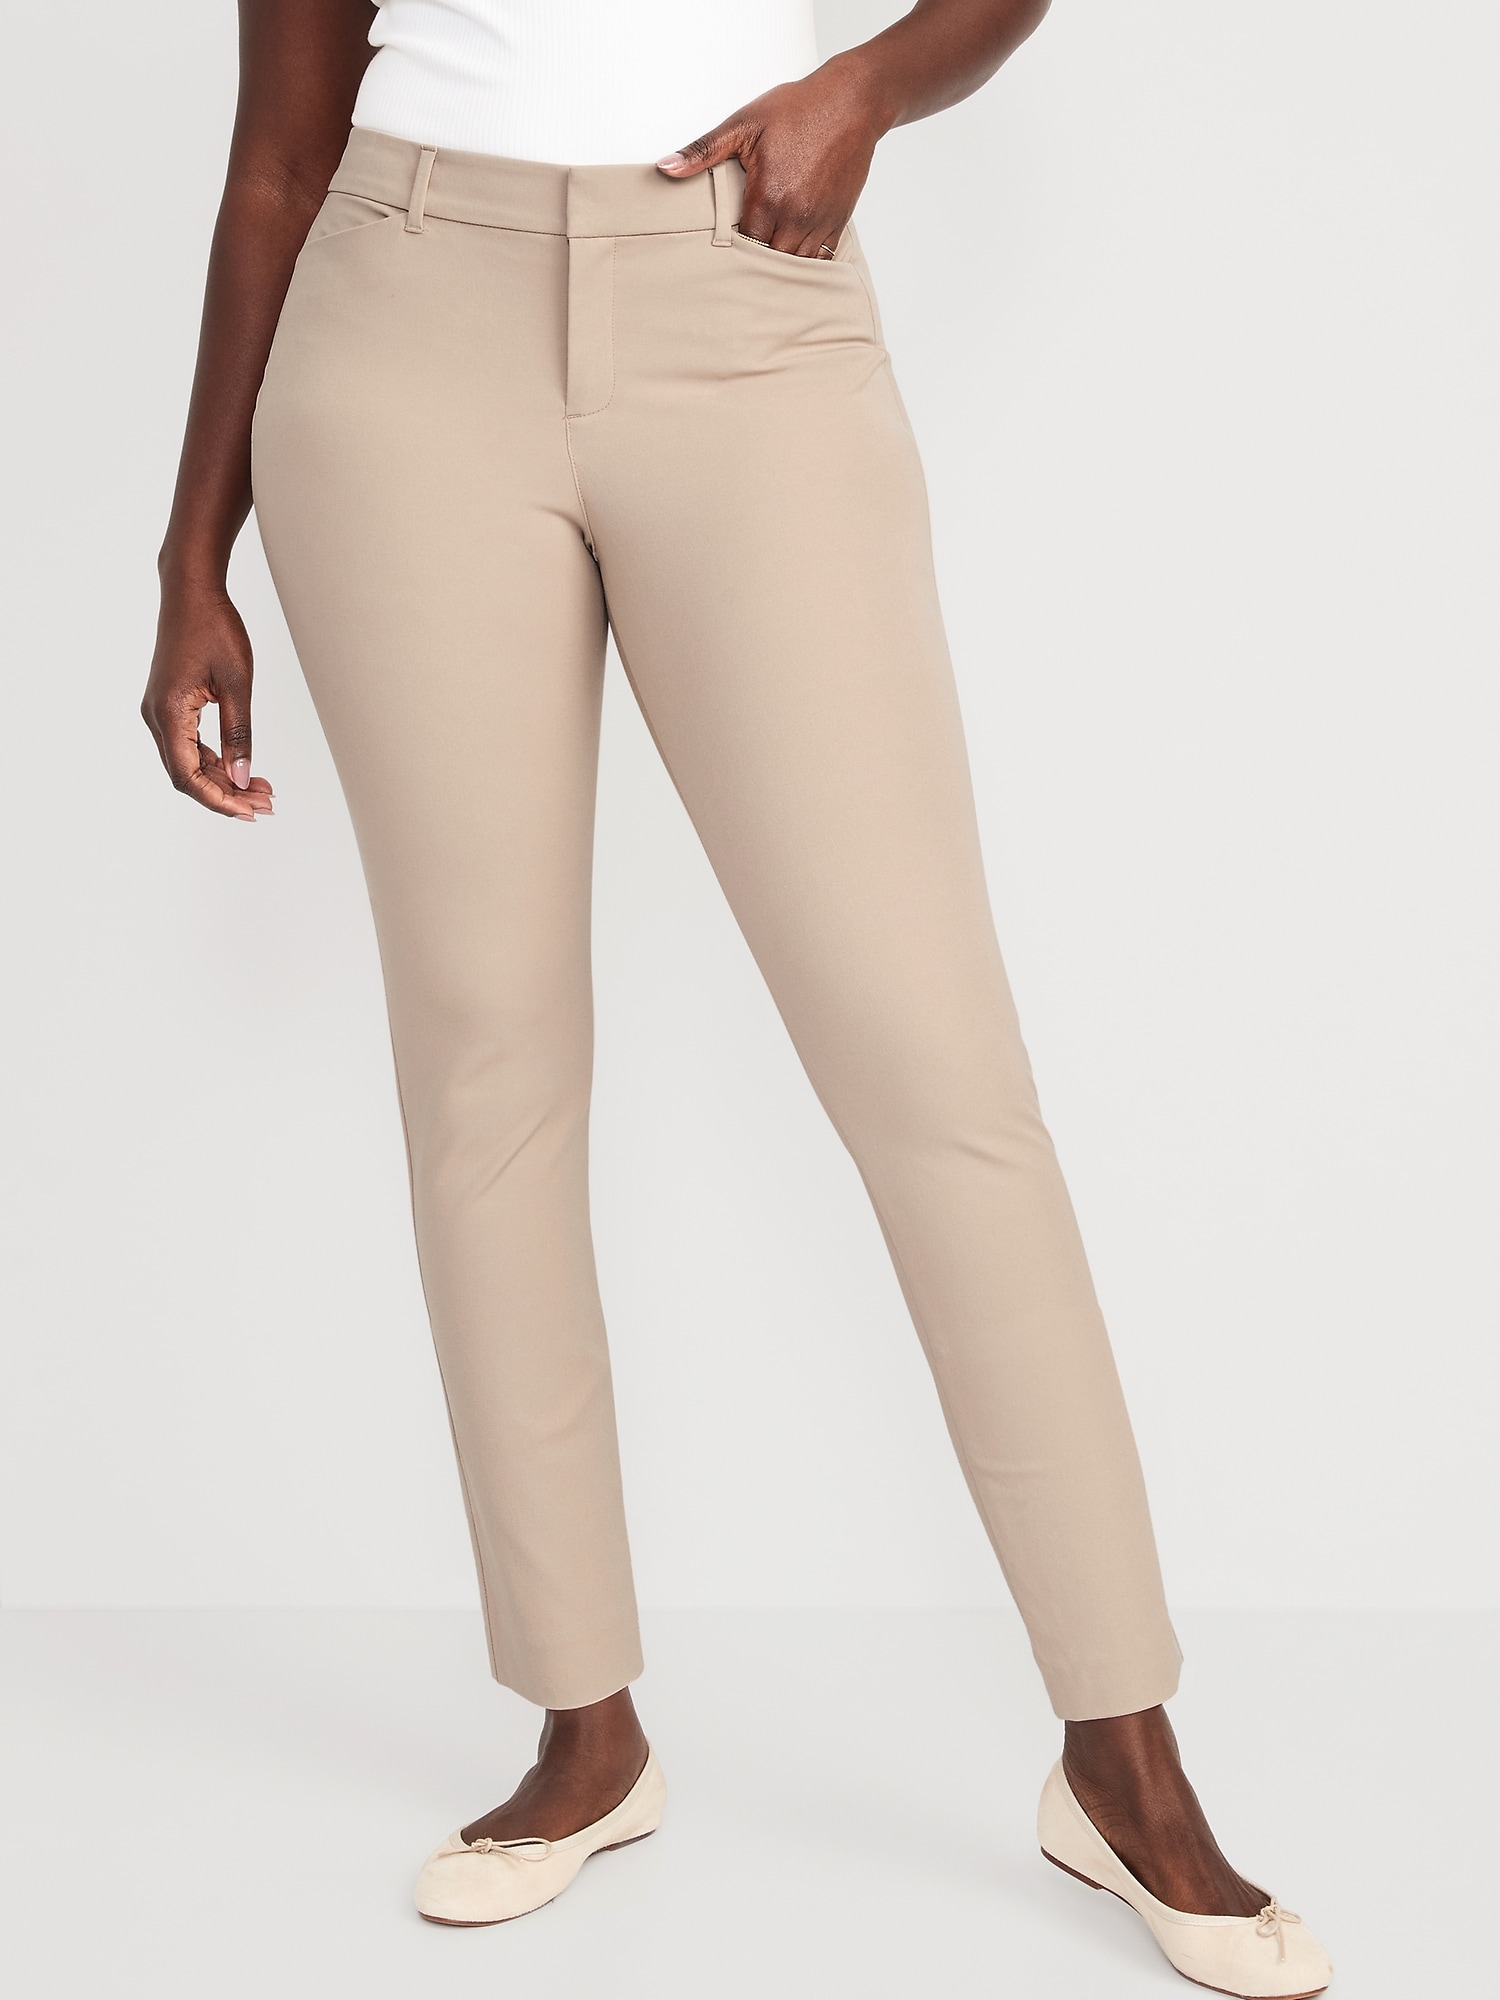 Old Navy Mid-Rise Pixie Ankle Pants for Women  Pants for women, Ankle  pants outfit, Ankle pants